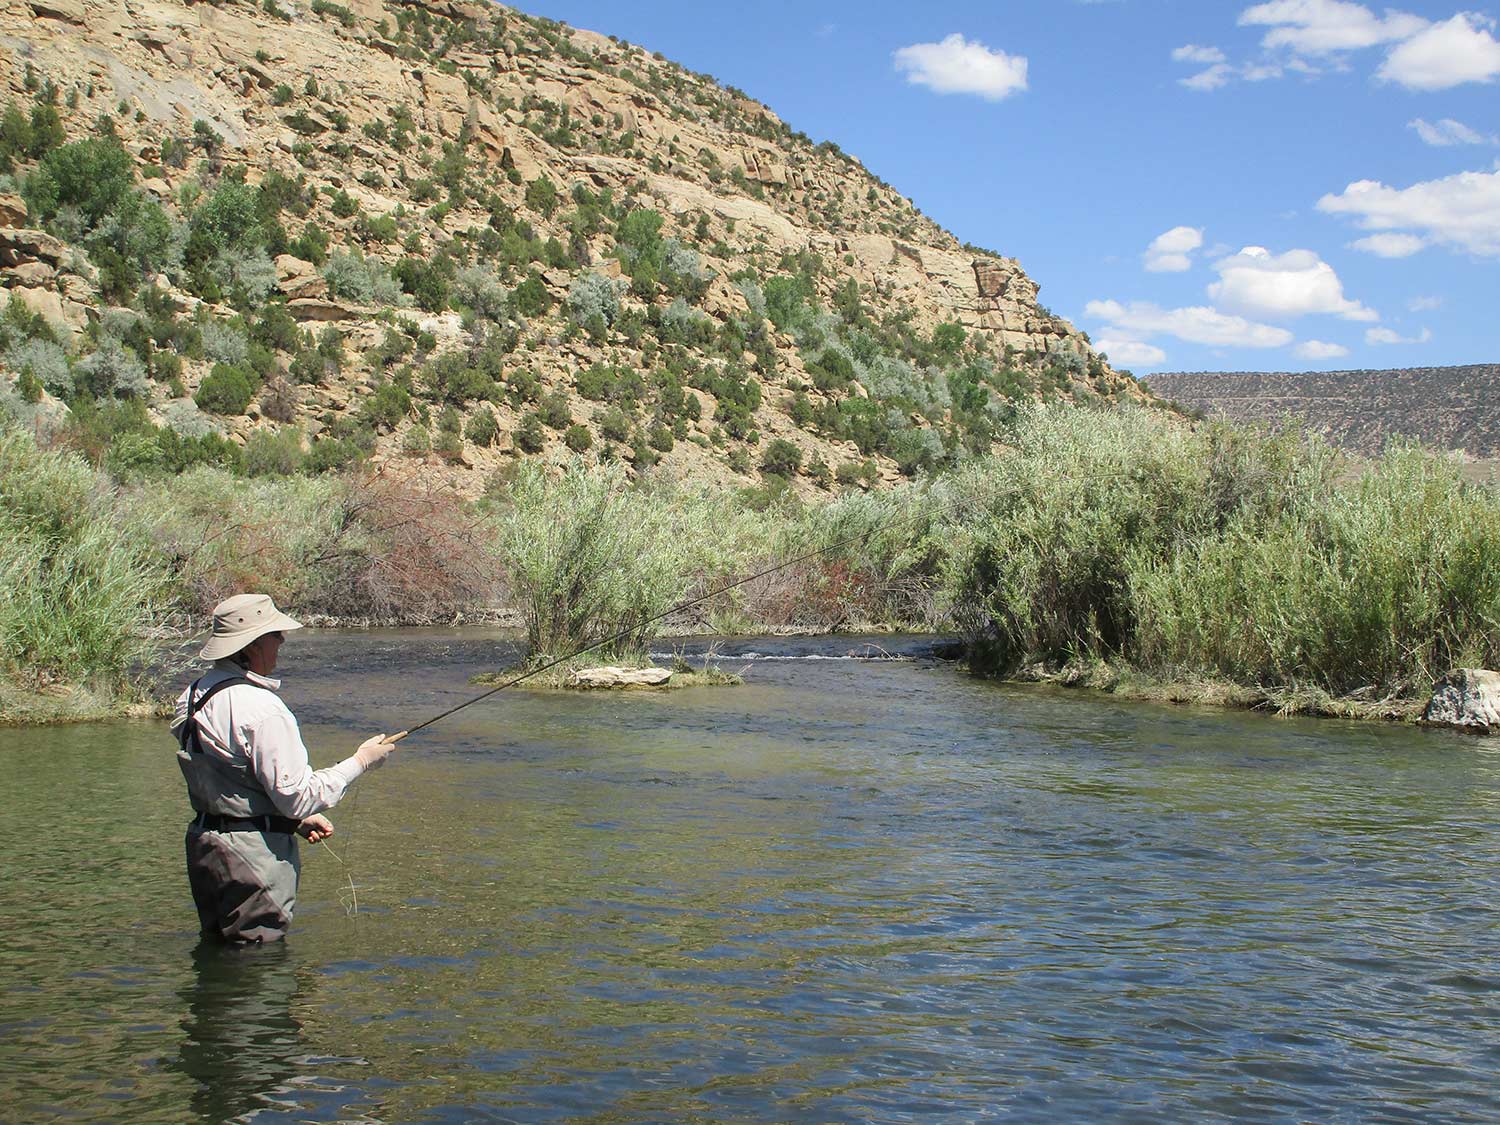 An angler wading in the San Juan River.